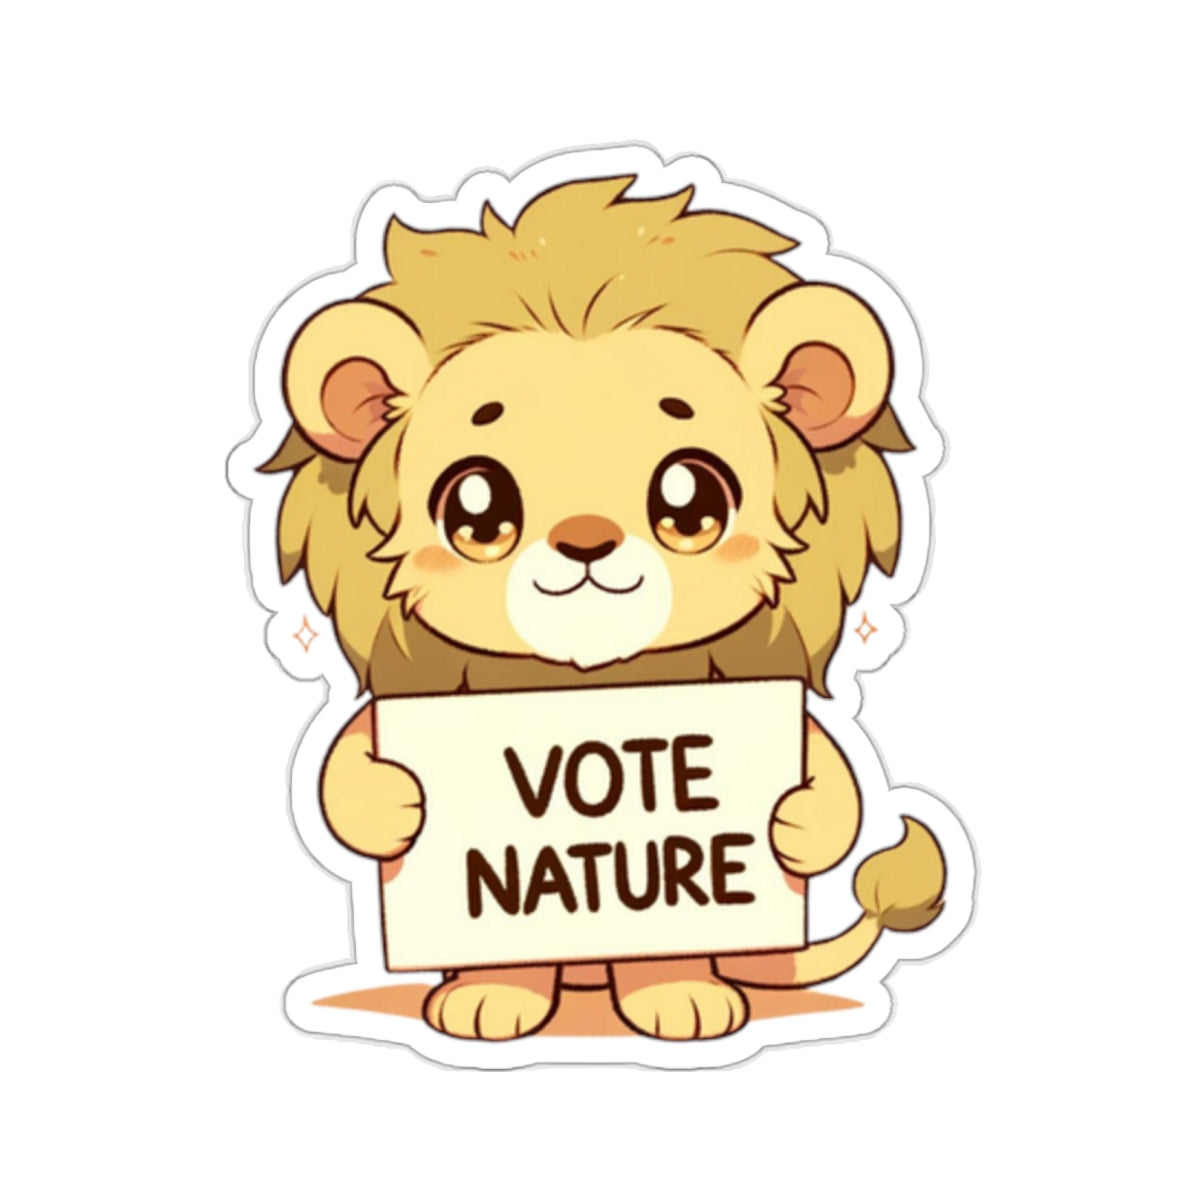 Inspirational Cute Lion Statement vinyl Sticker: Vote Nature! laptop, kindle, phone, ipad, instrument case, notebook, mood board, or wall